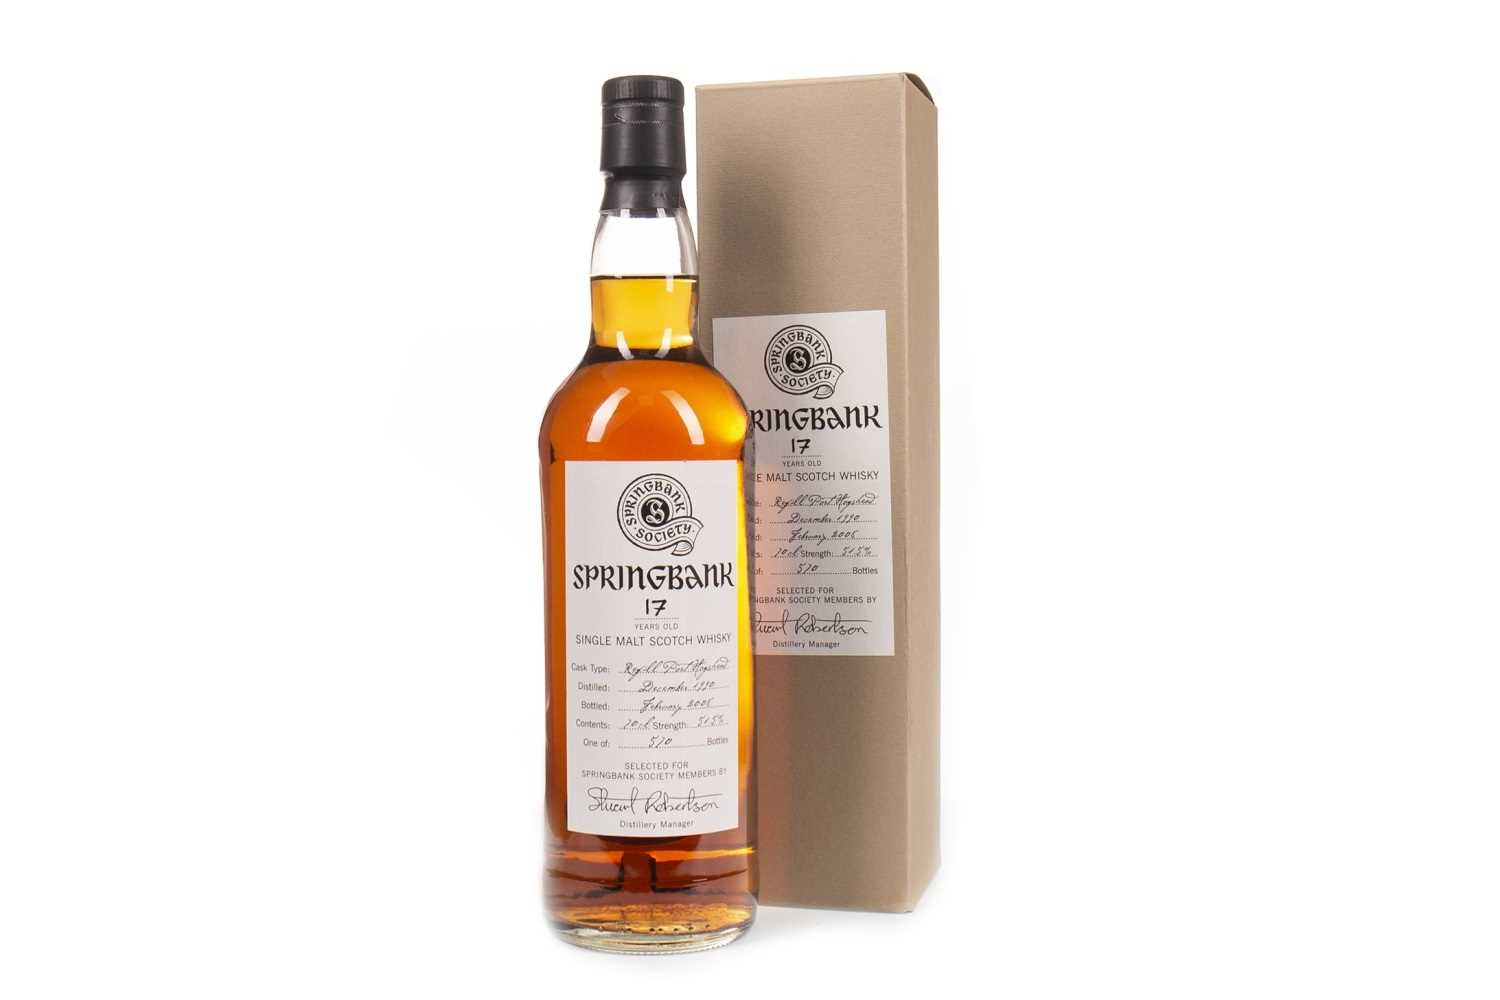 Lot 51 - SPRINGBANK 1990 AGED 17 YEARS SOCIETY BOTTLING